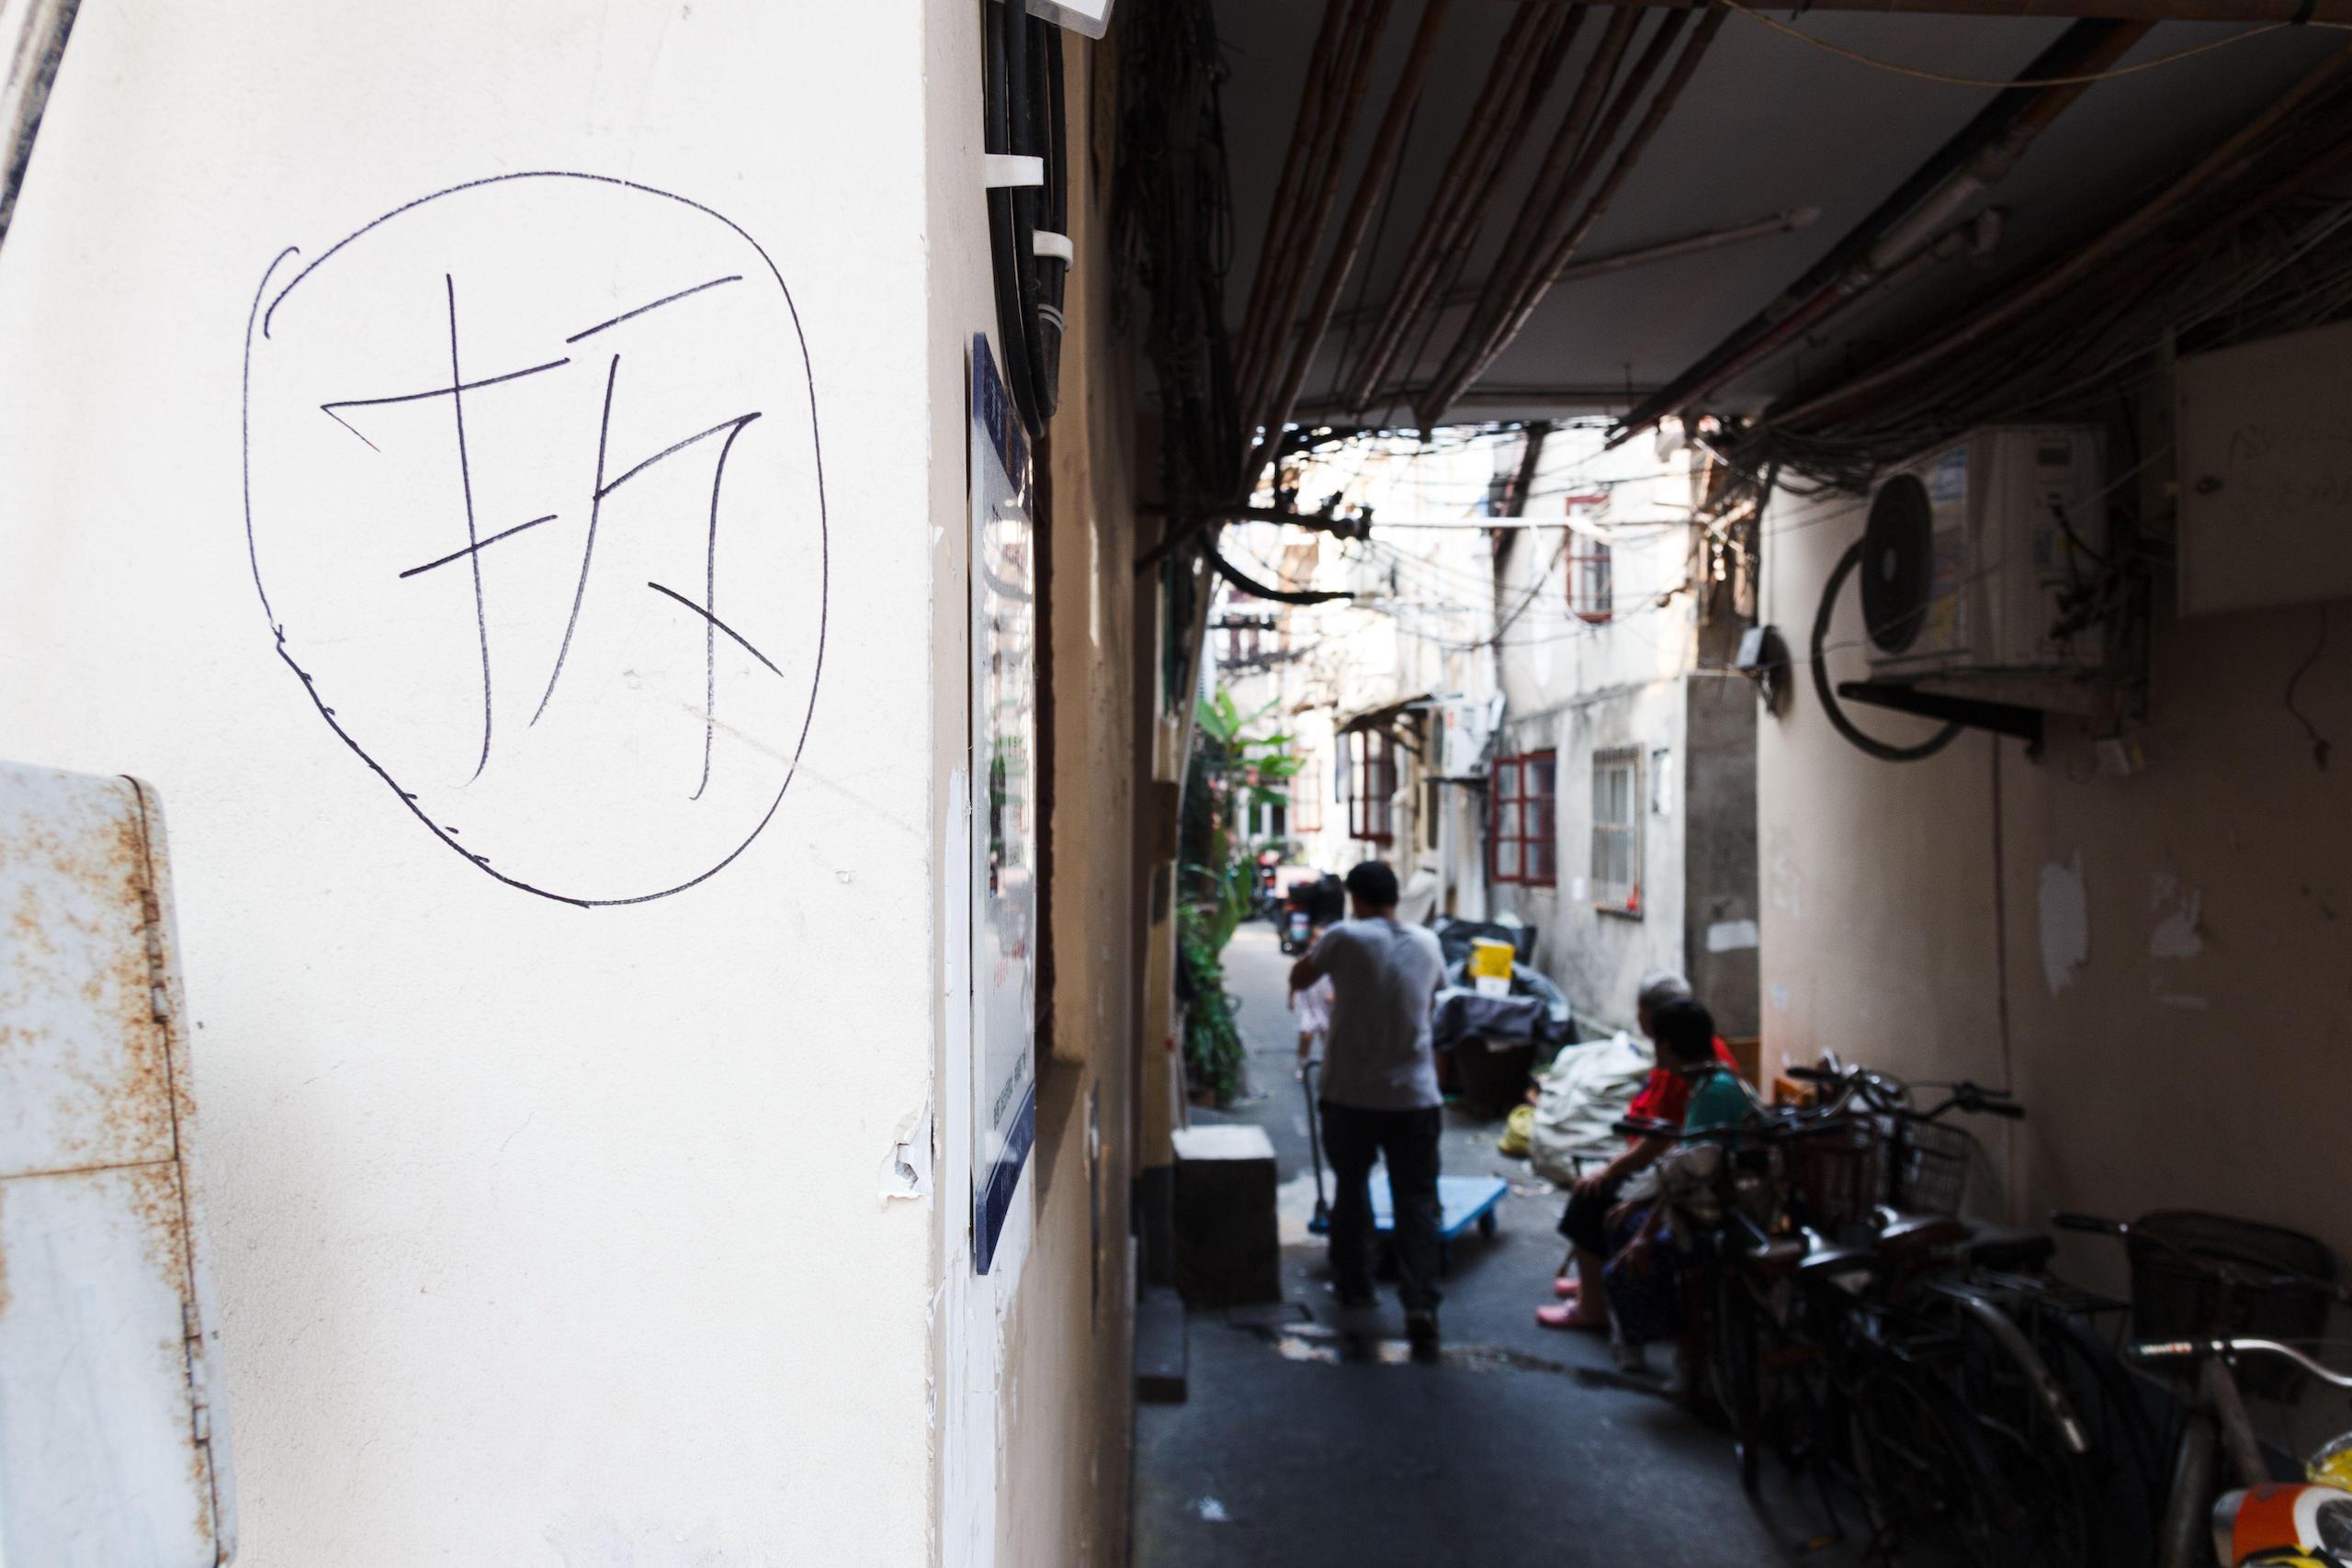 Chinese character for 'demolish' written in black on old building in Laoximen neighbourhood in Shanghai, china demolition